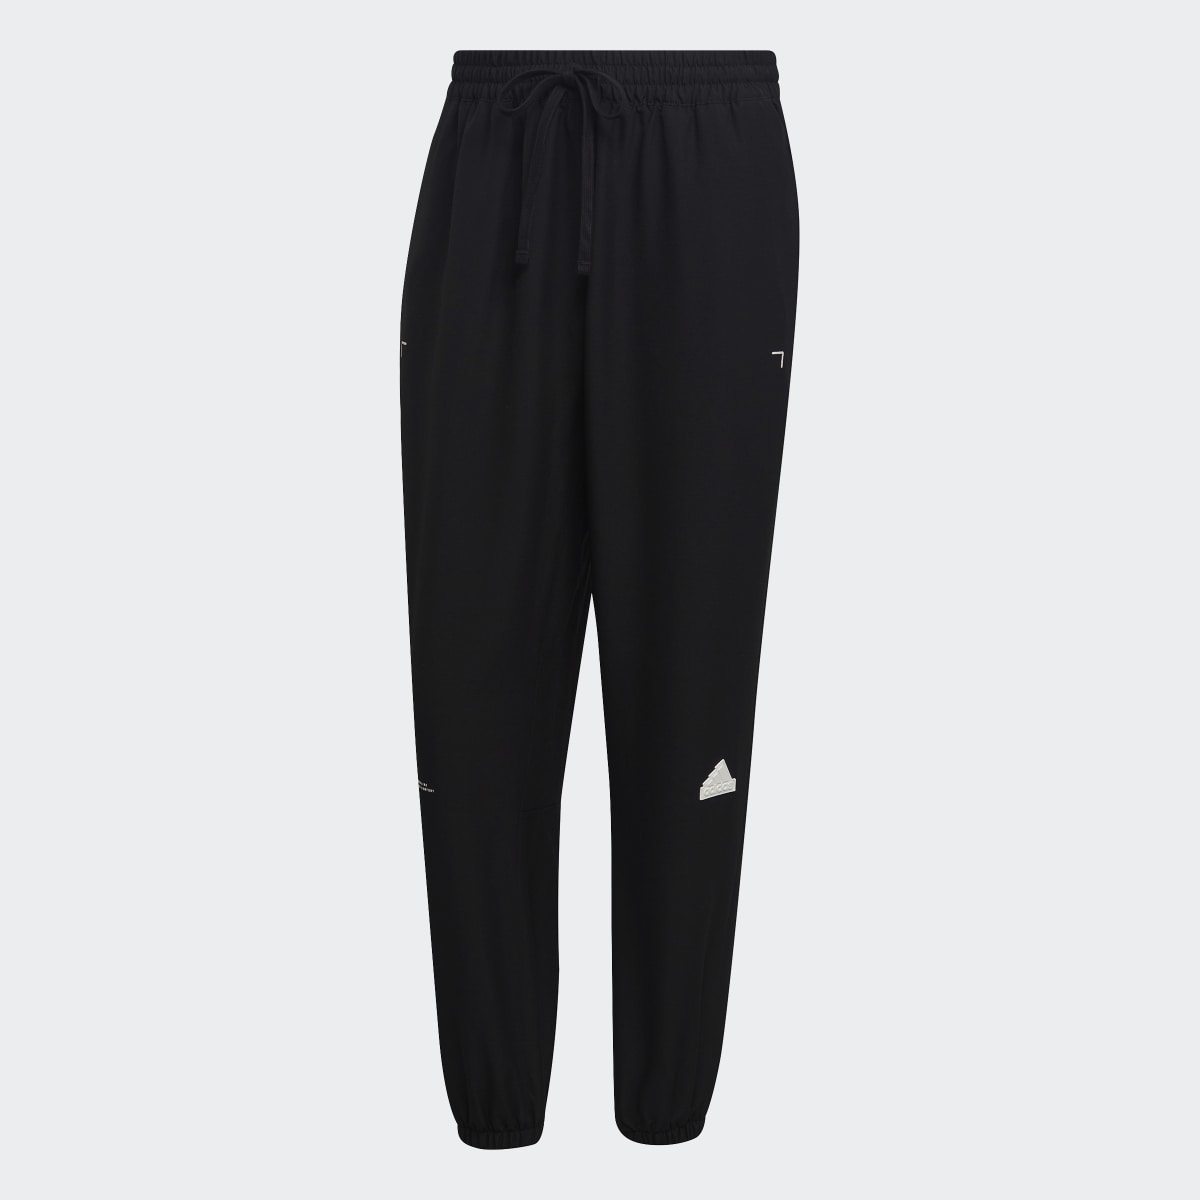 Adidas Woven Tracksuit Bottoms. 5